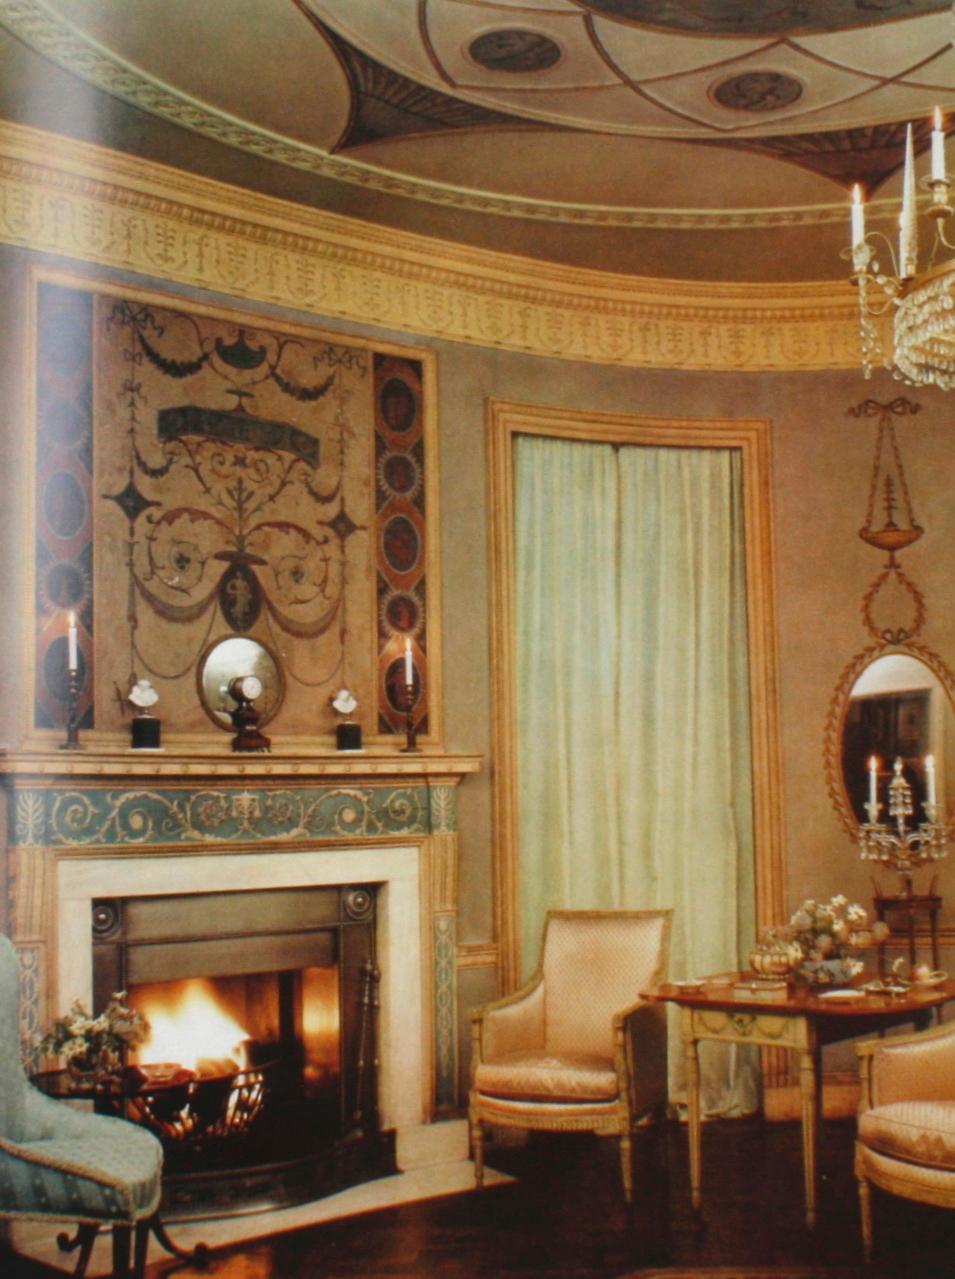 The Finest Rooms by America's Great Decorators, First Edition 2